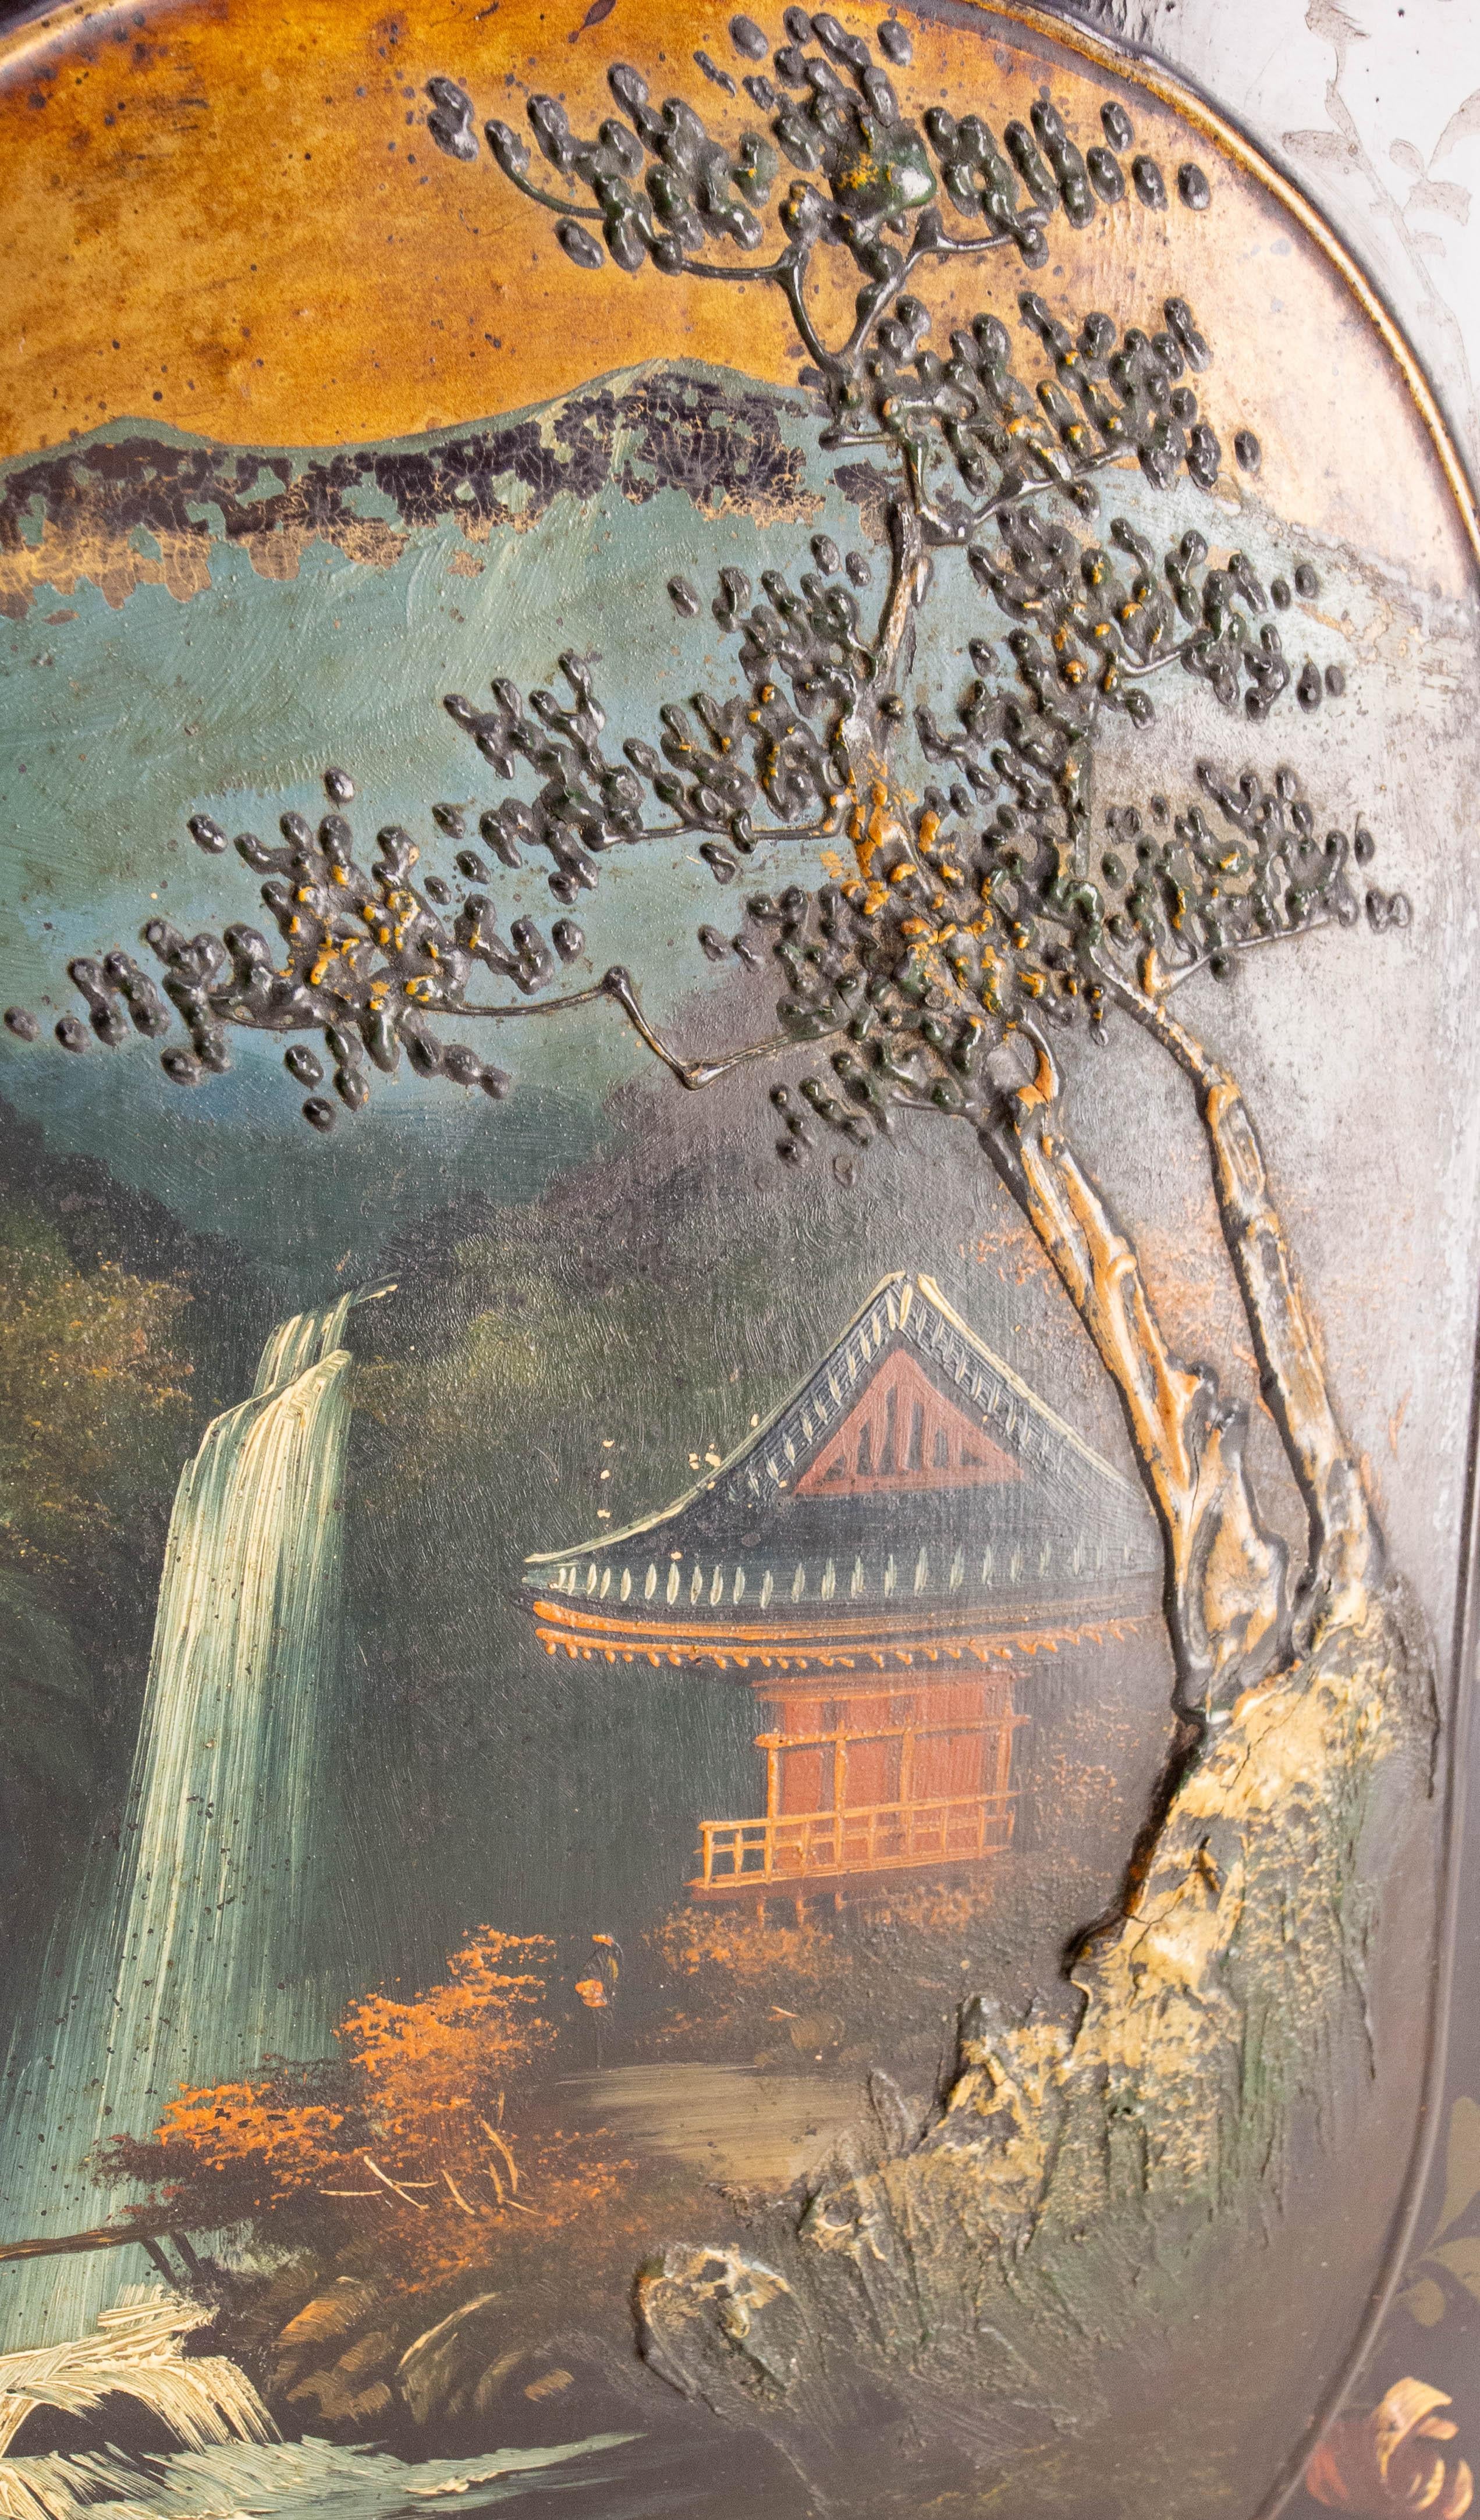 Pair of Japanese paintings done on wood panel, probably dating from the middle of the 19th century (1850-1860).

One represents a landscape with a temple; in the foreground, a tree in slight relief (stucco), in a natural setting.
The other depicts a